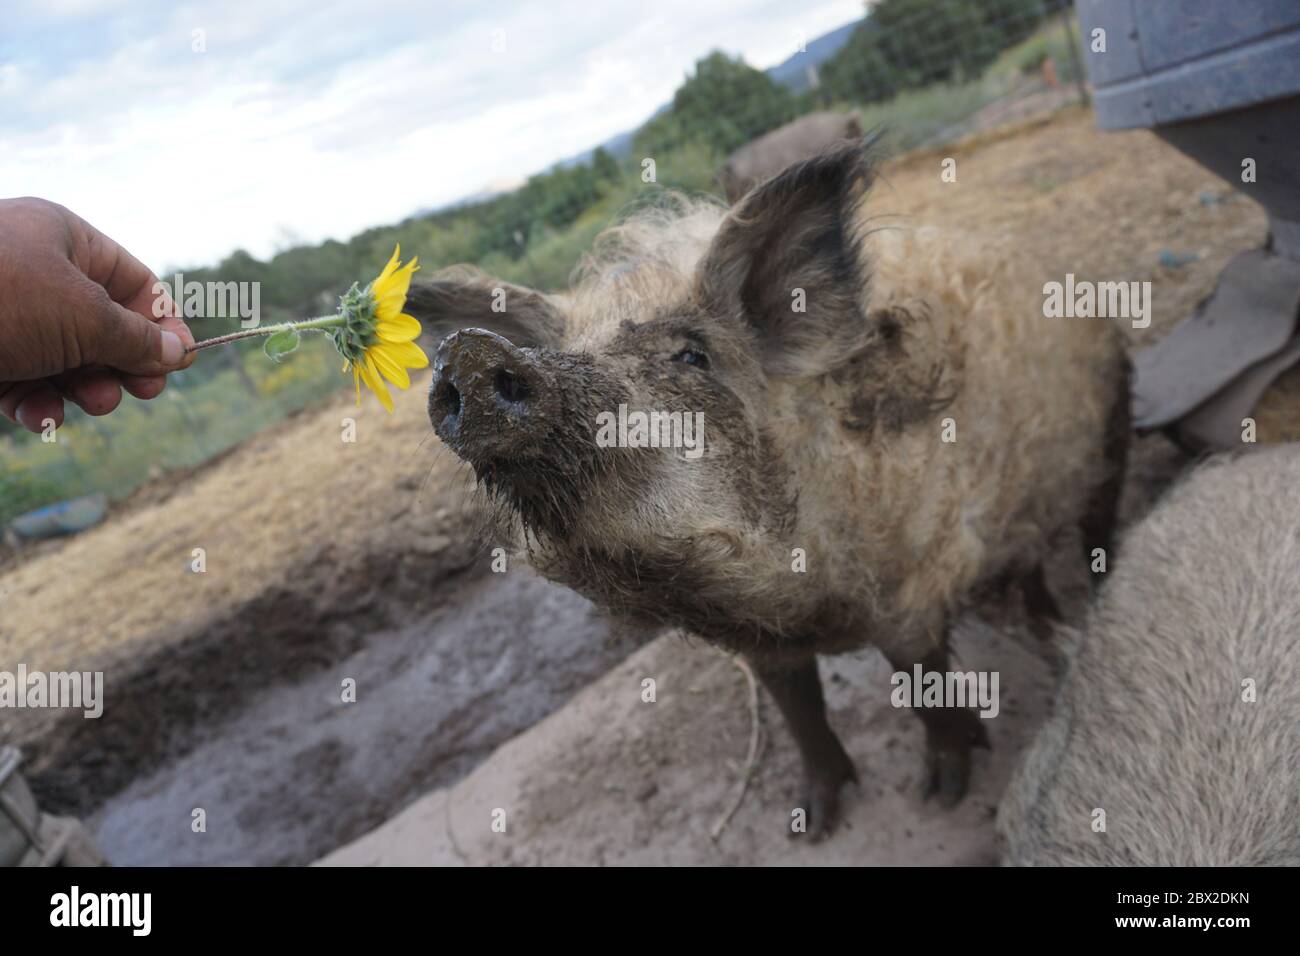 An Alpine wooly Mangalista pig smelling a sunflower covered in mud. Stock Photo